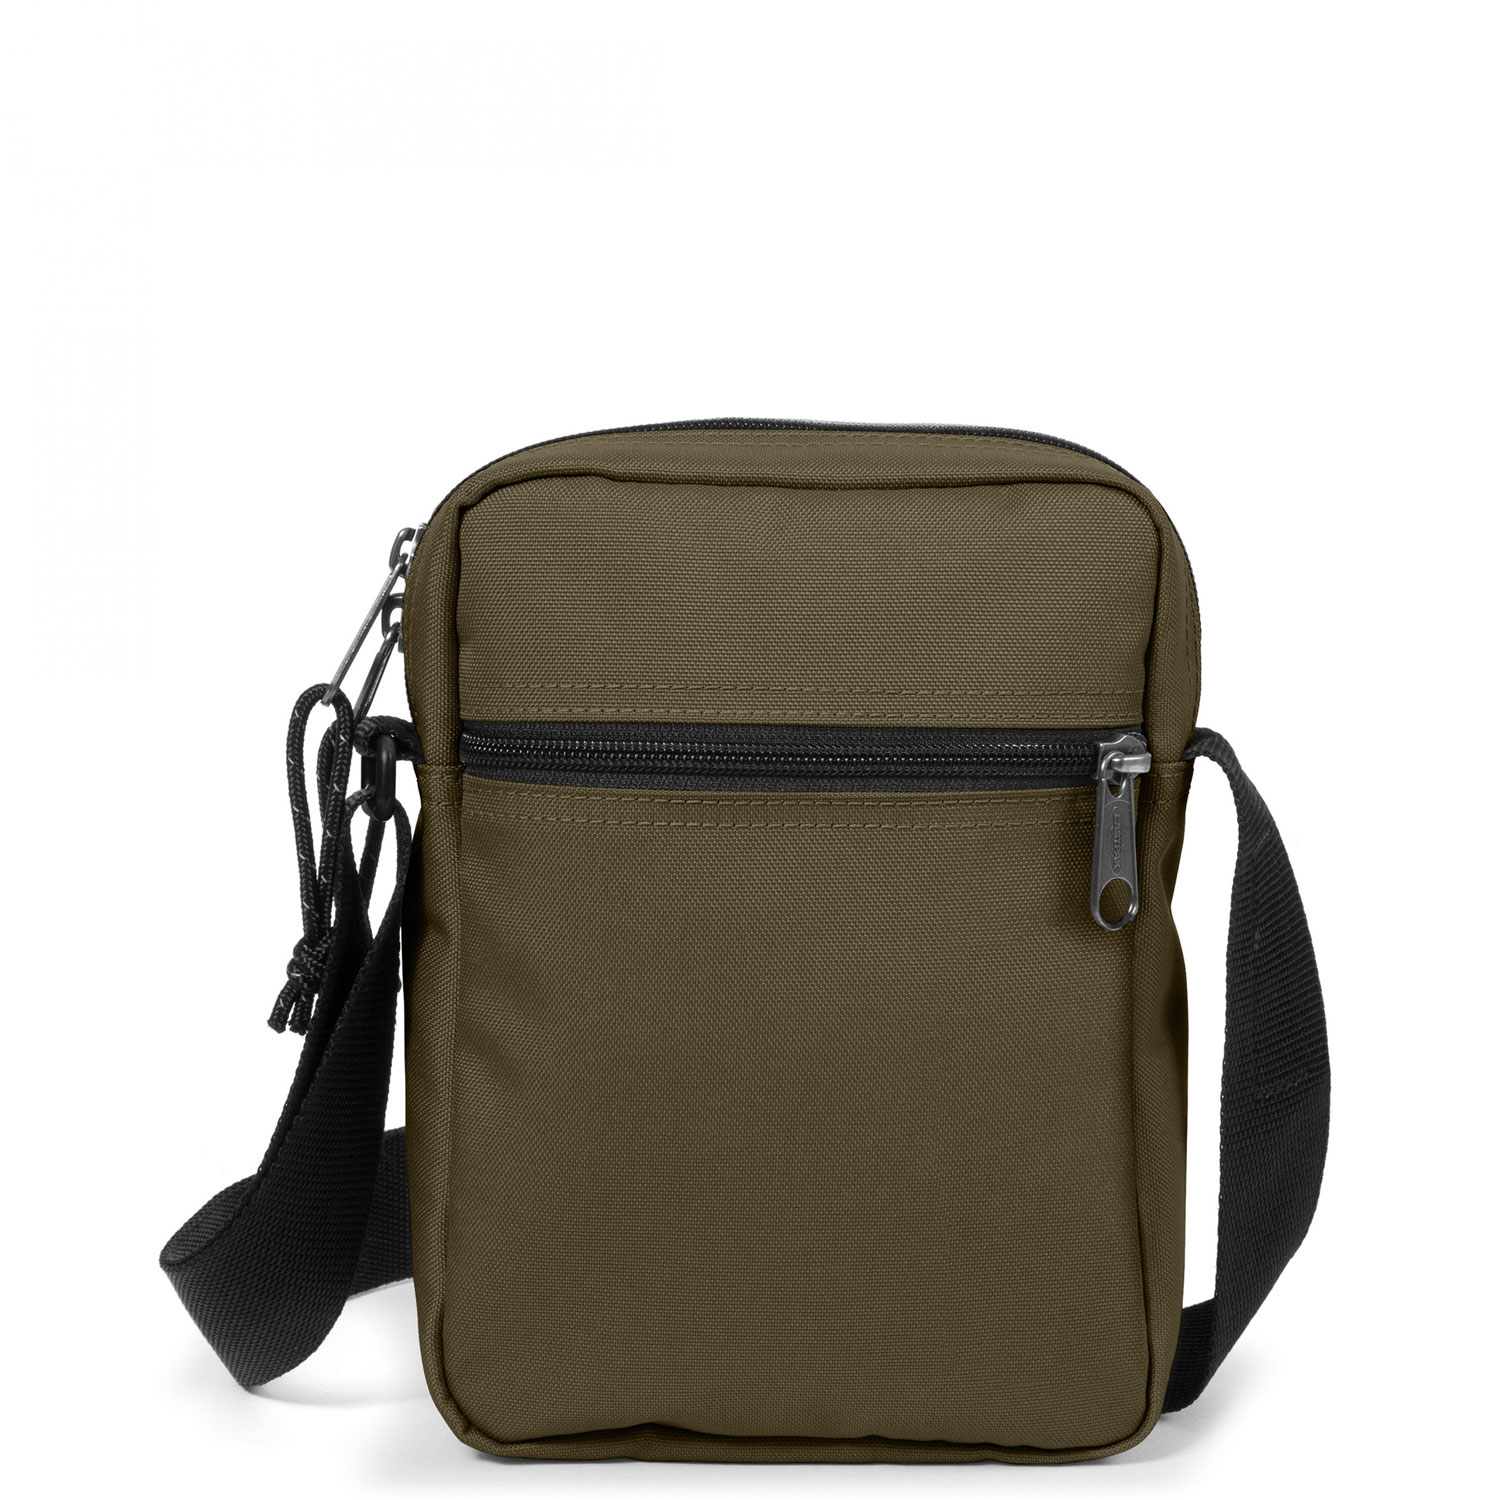 Eastpak Umhängetasche The One army olive